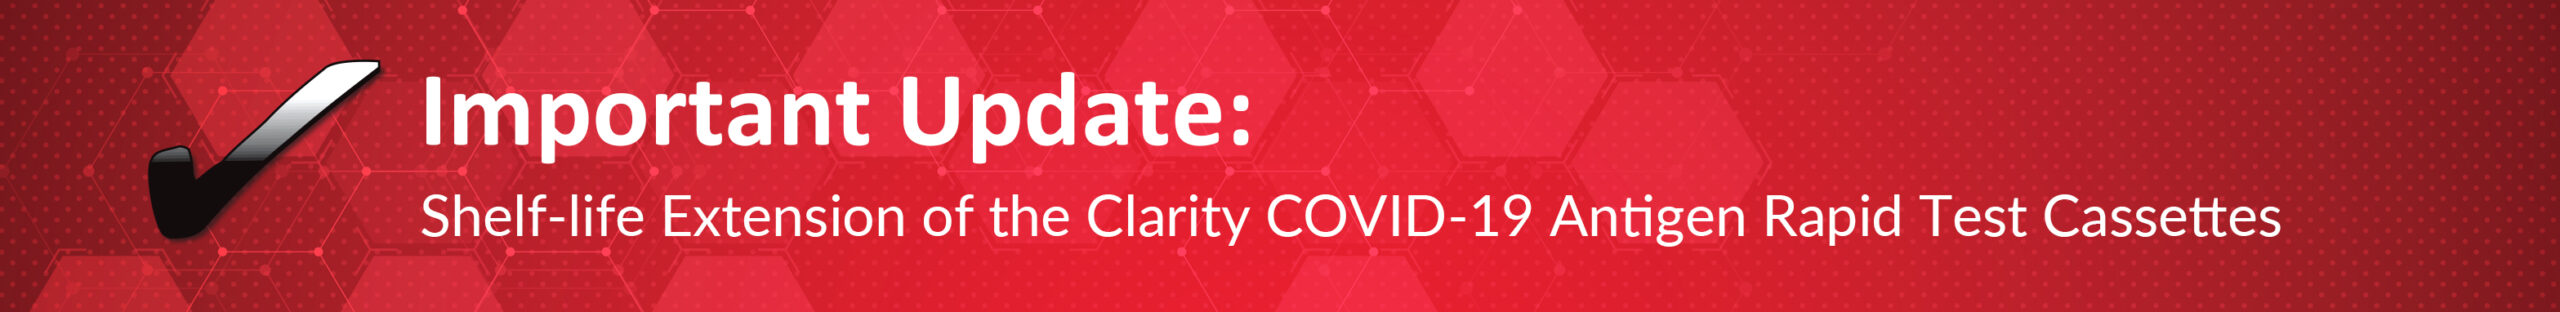 Important Update: Shelf-life Extension of the Clarity COVID-19 Antigen Rapid Test Cassettes